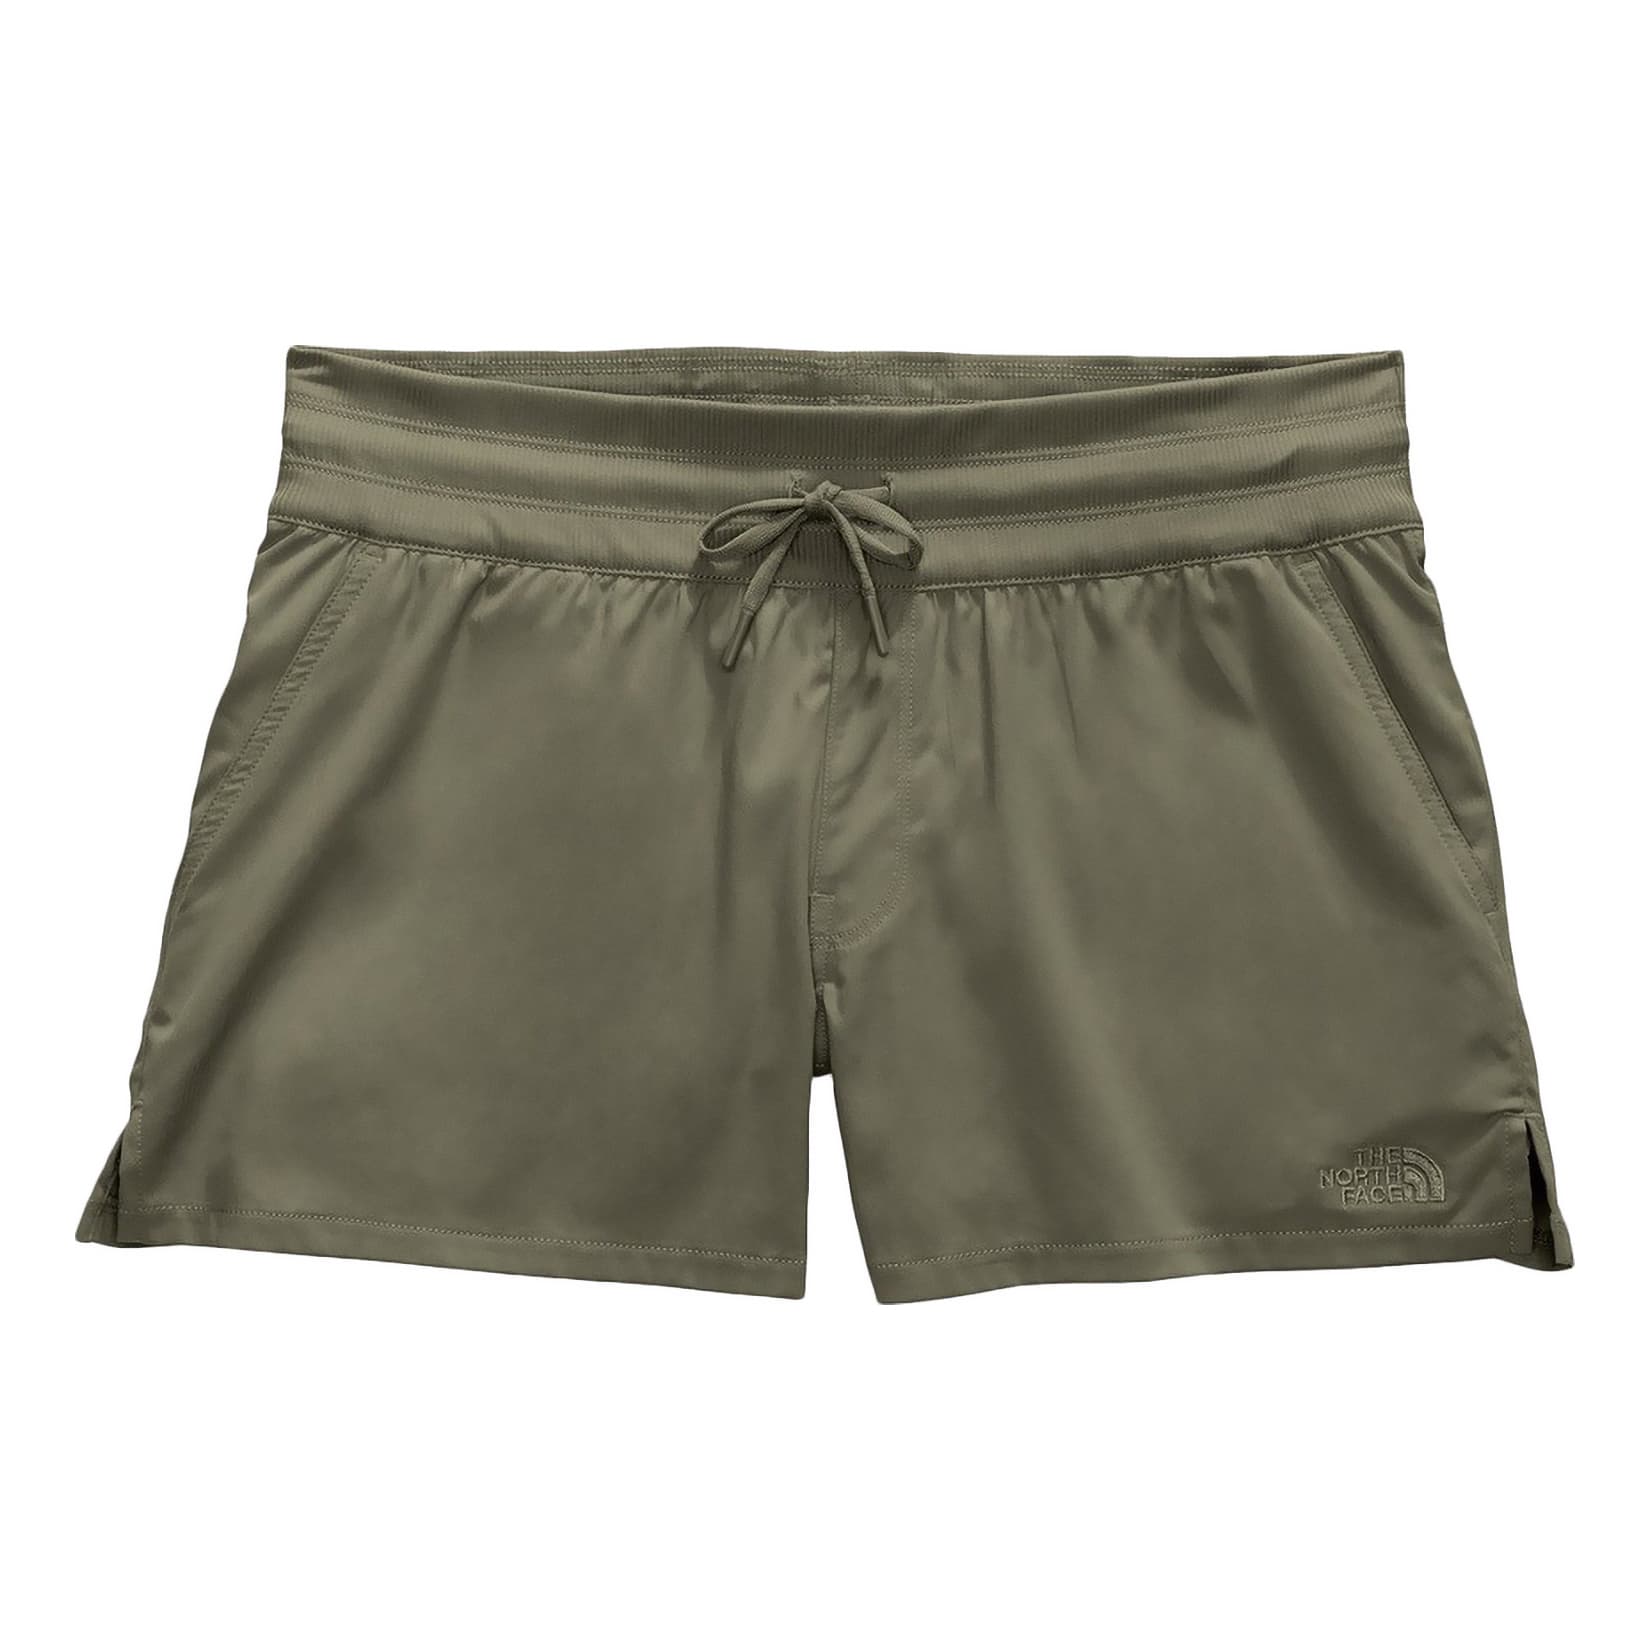 THE NORTH FACE Aphrodite Motion Shorts - Women’s